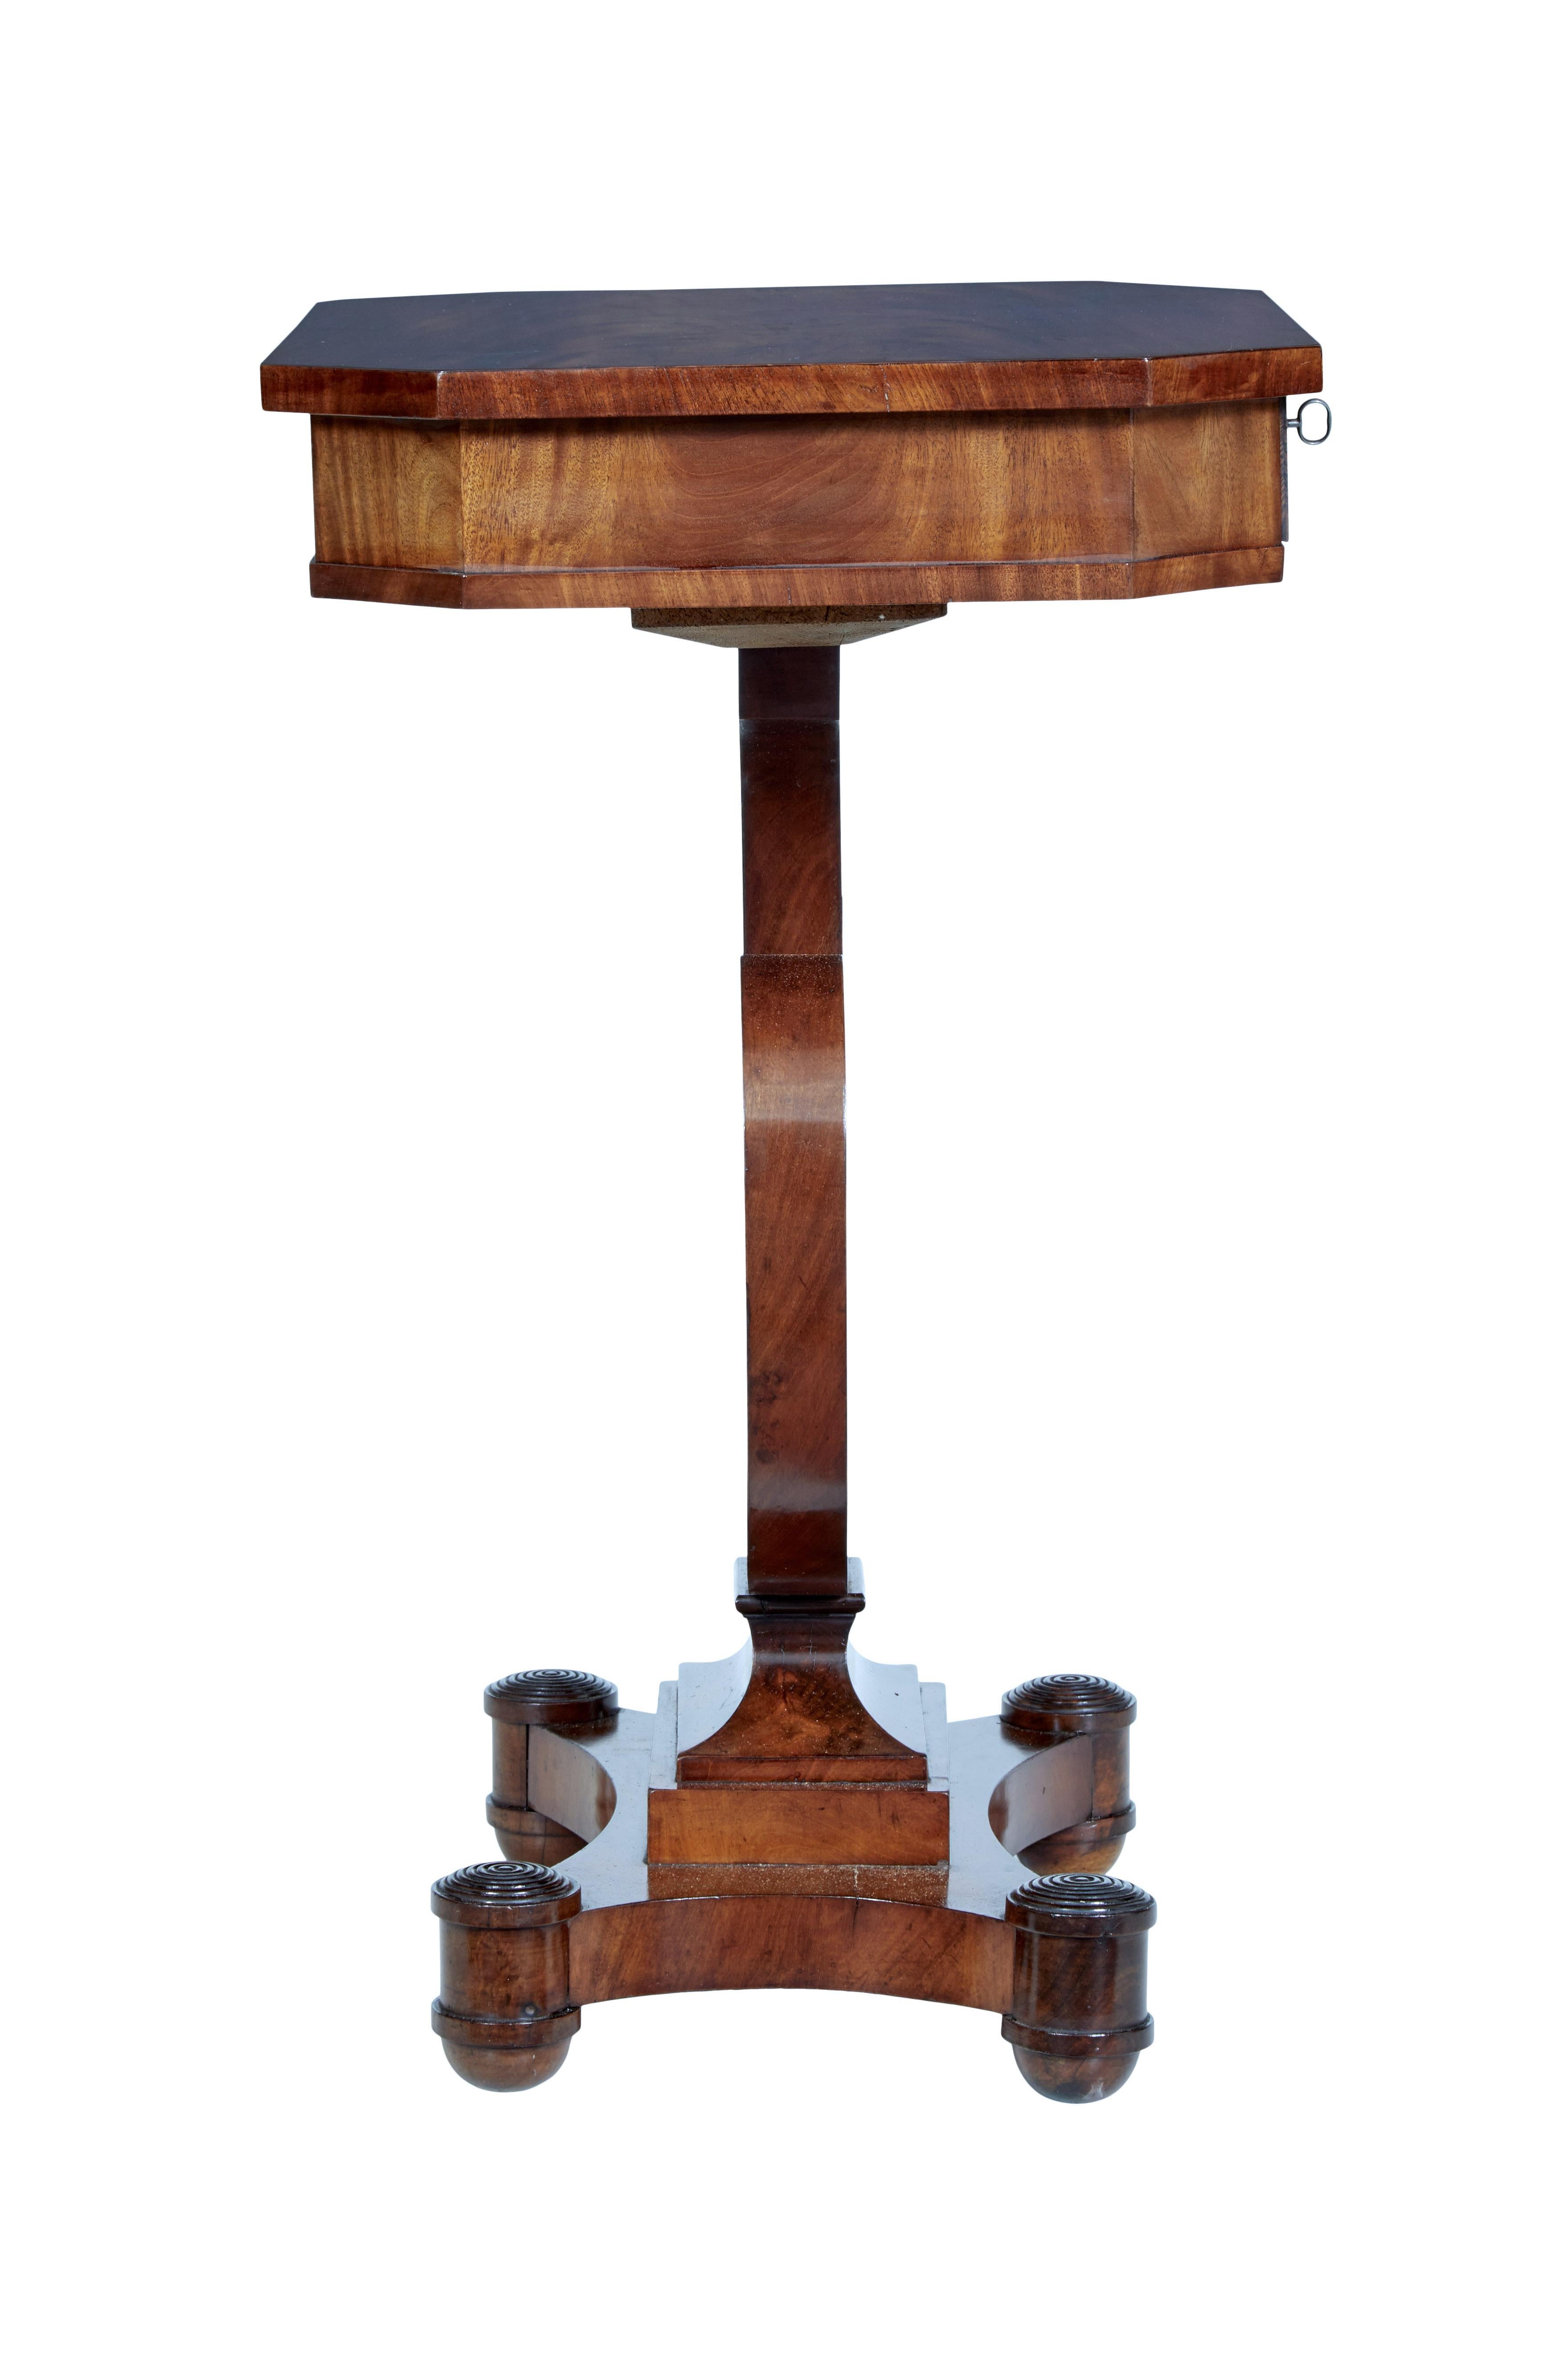 Hand-Carved 19th Century Flame Mahogany Lyre Form Sewing Table